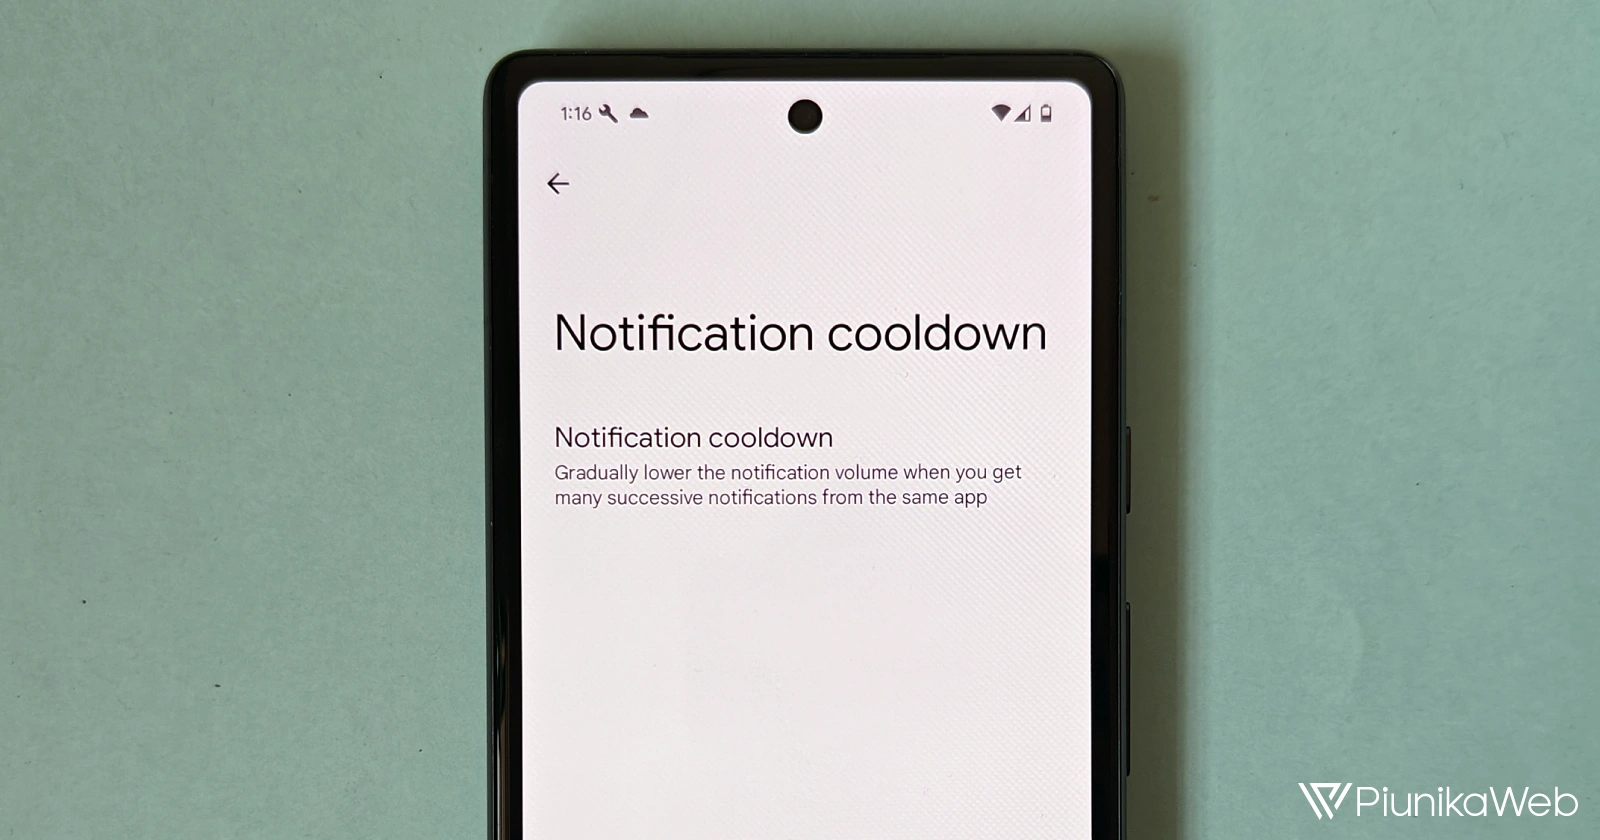 Android 15 Developer Preview 1 update brings 'Notification cooldown' feature